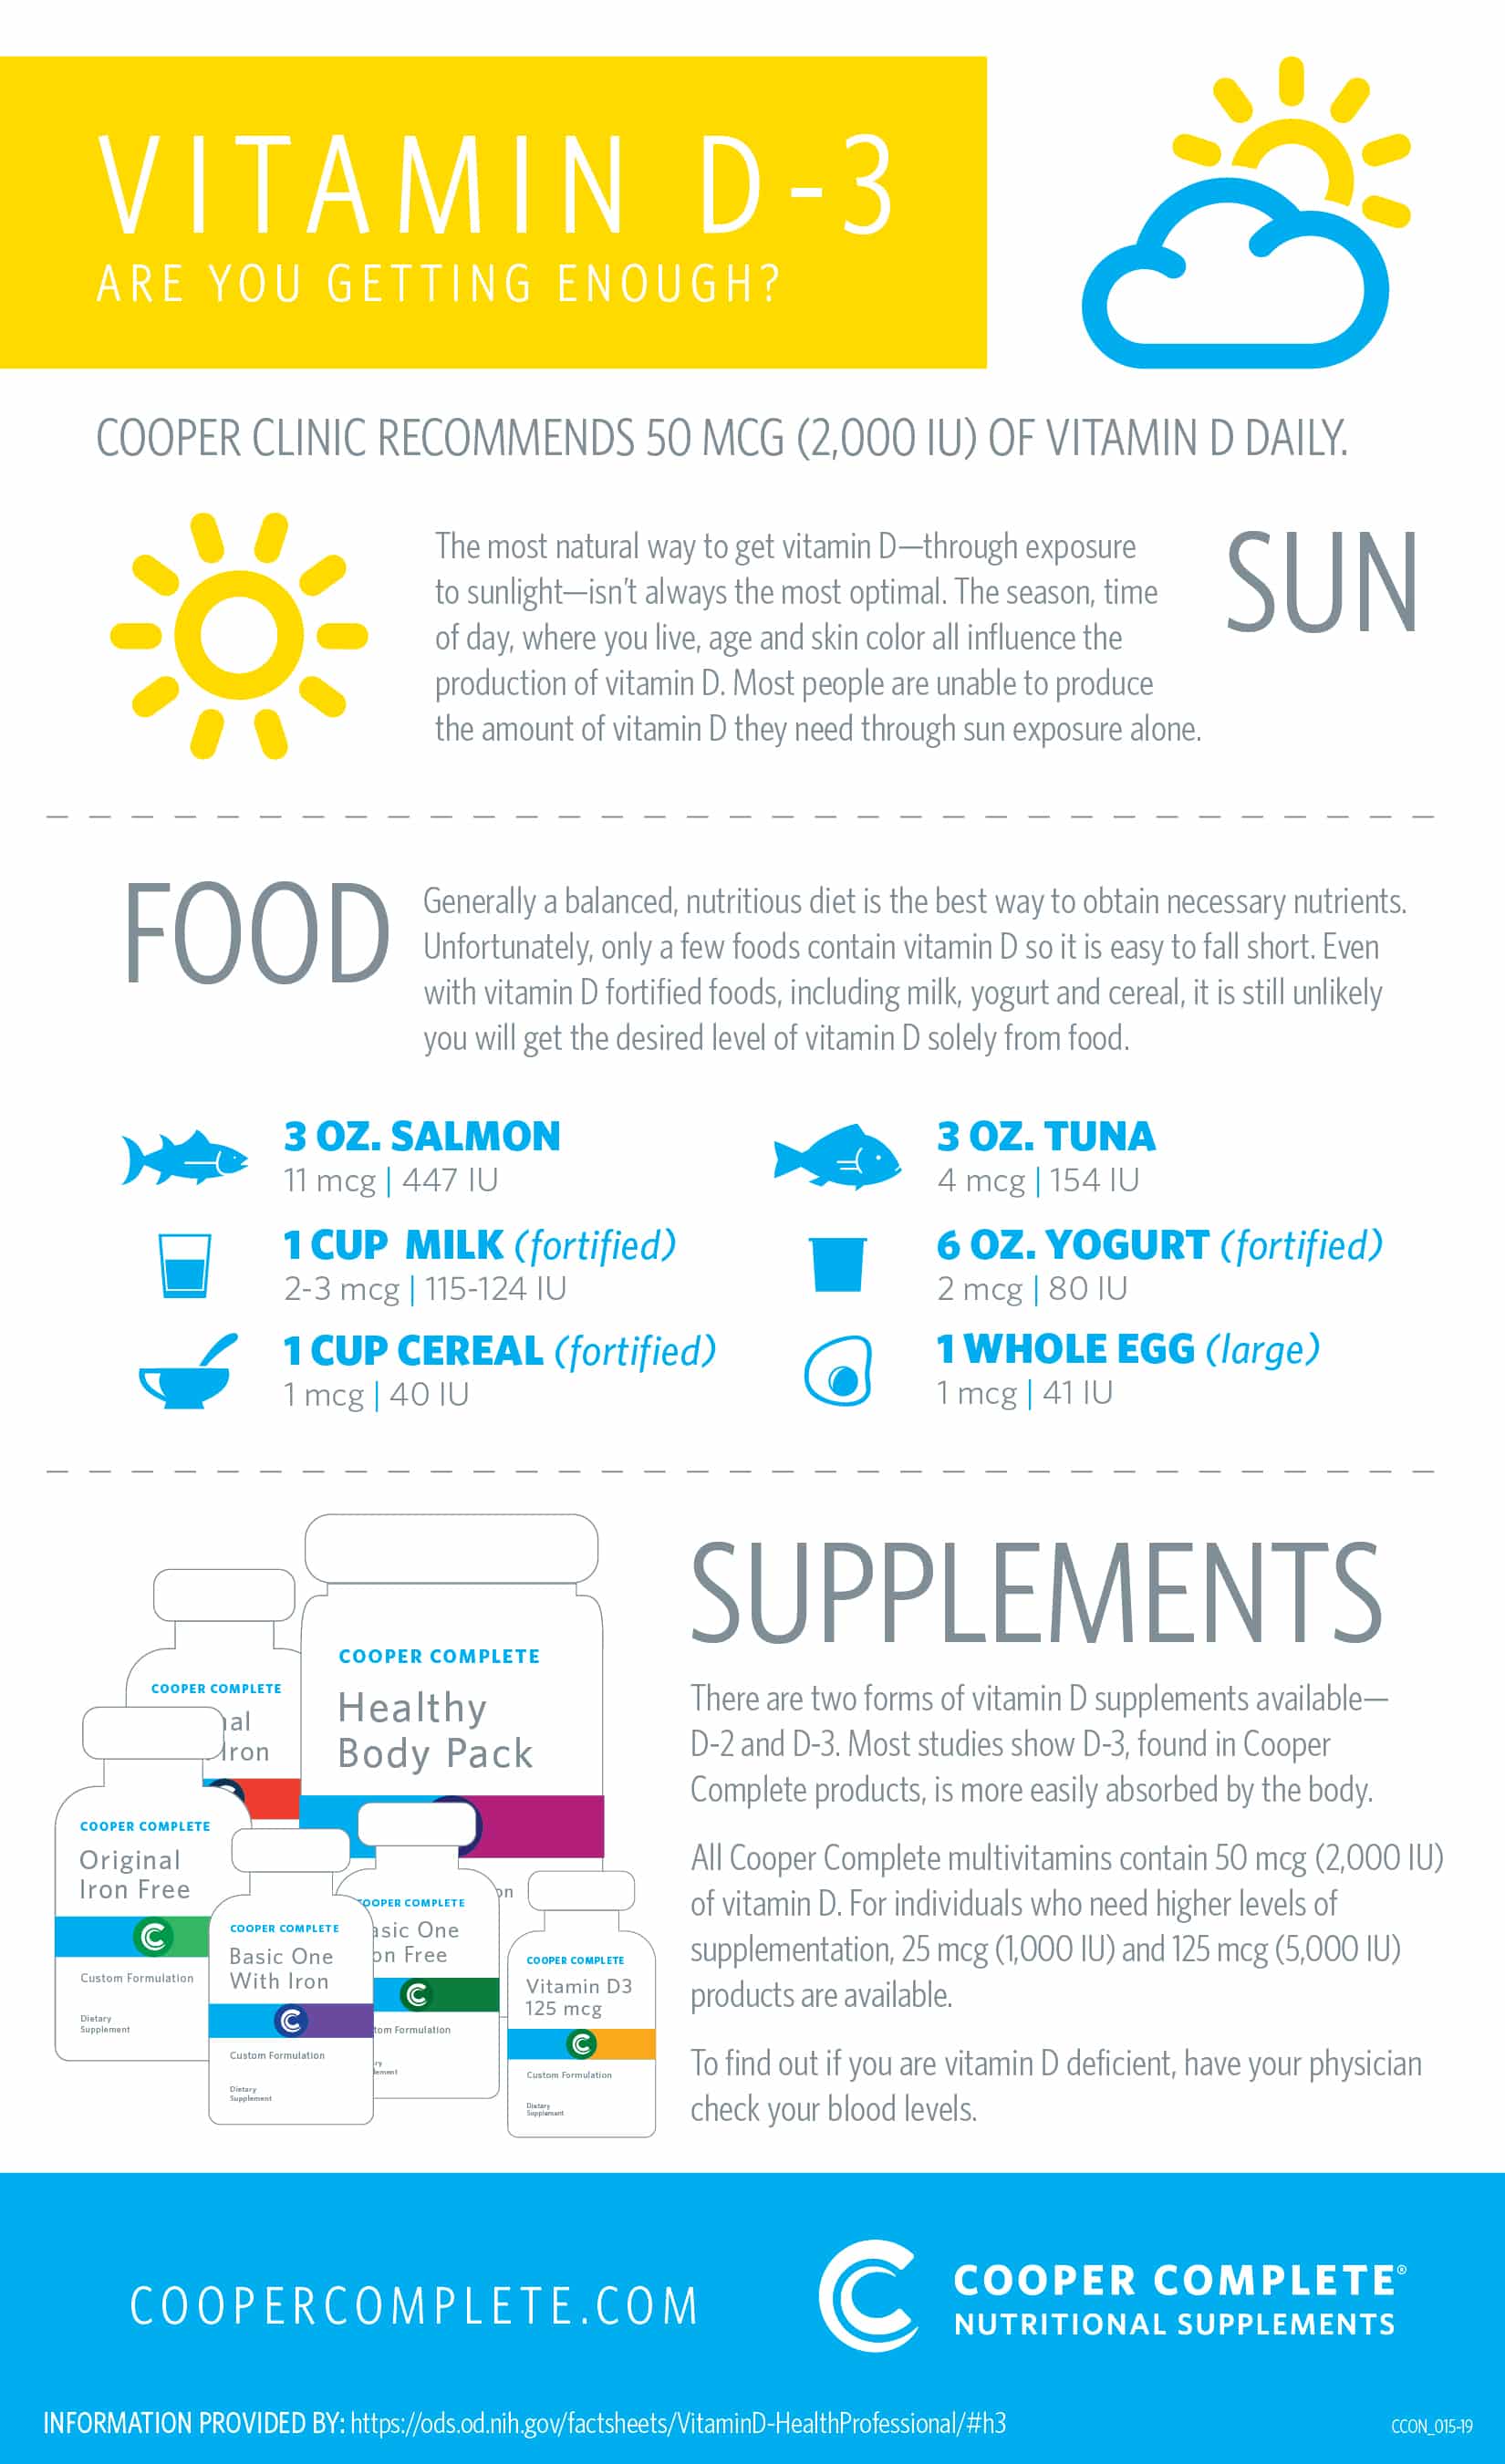 Vitamin D Infographic Are You Getting Enough Vitamin D